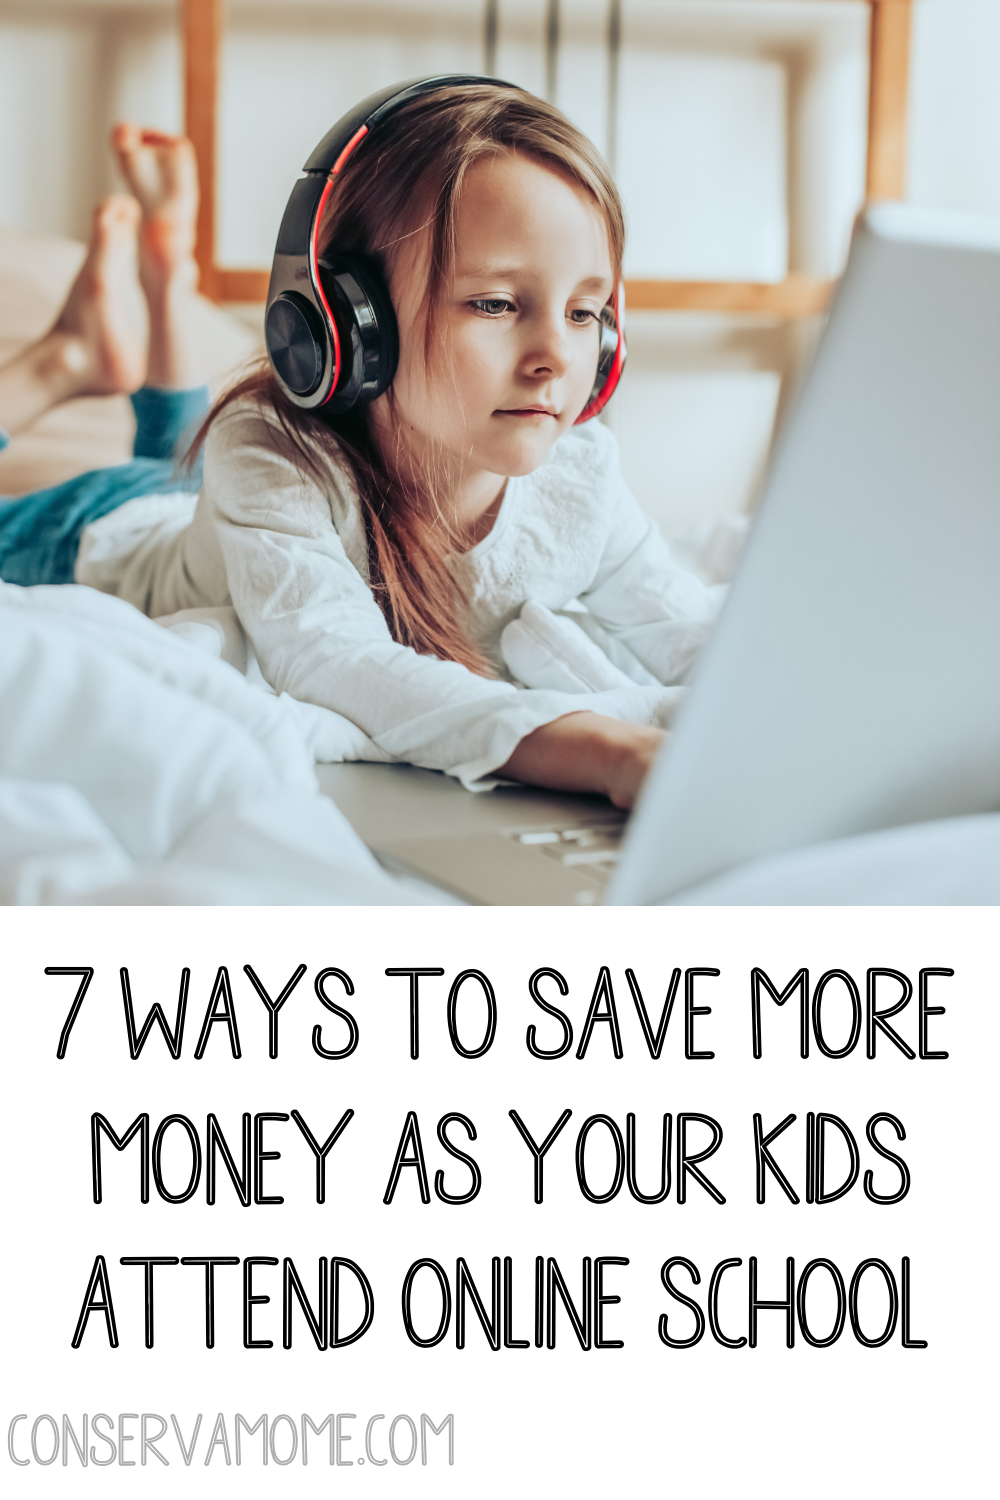 7 Ways to save more money as your kids attend online school